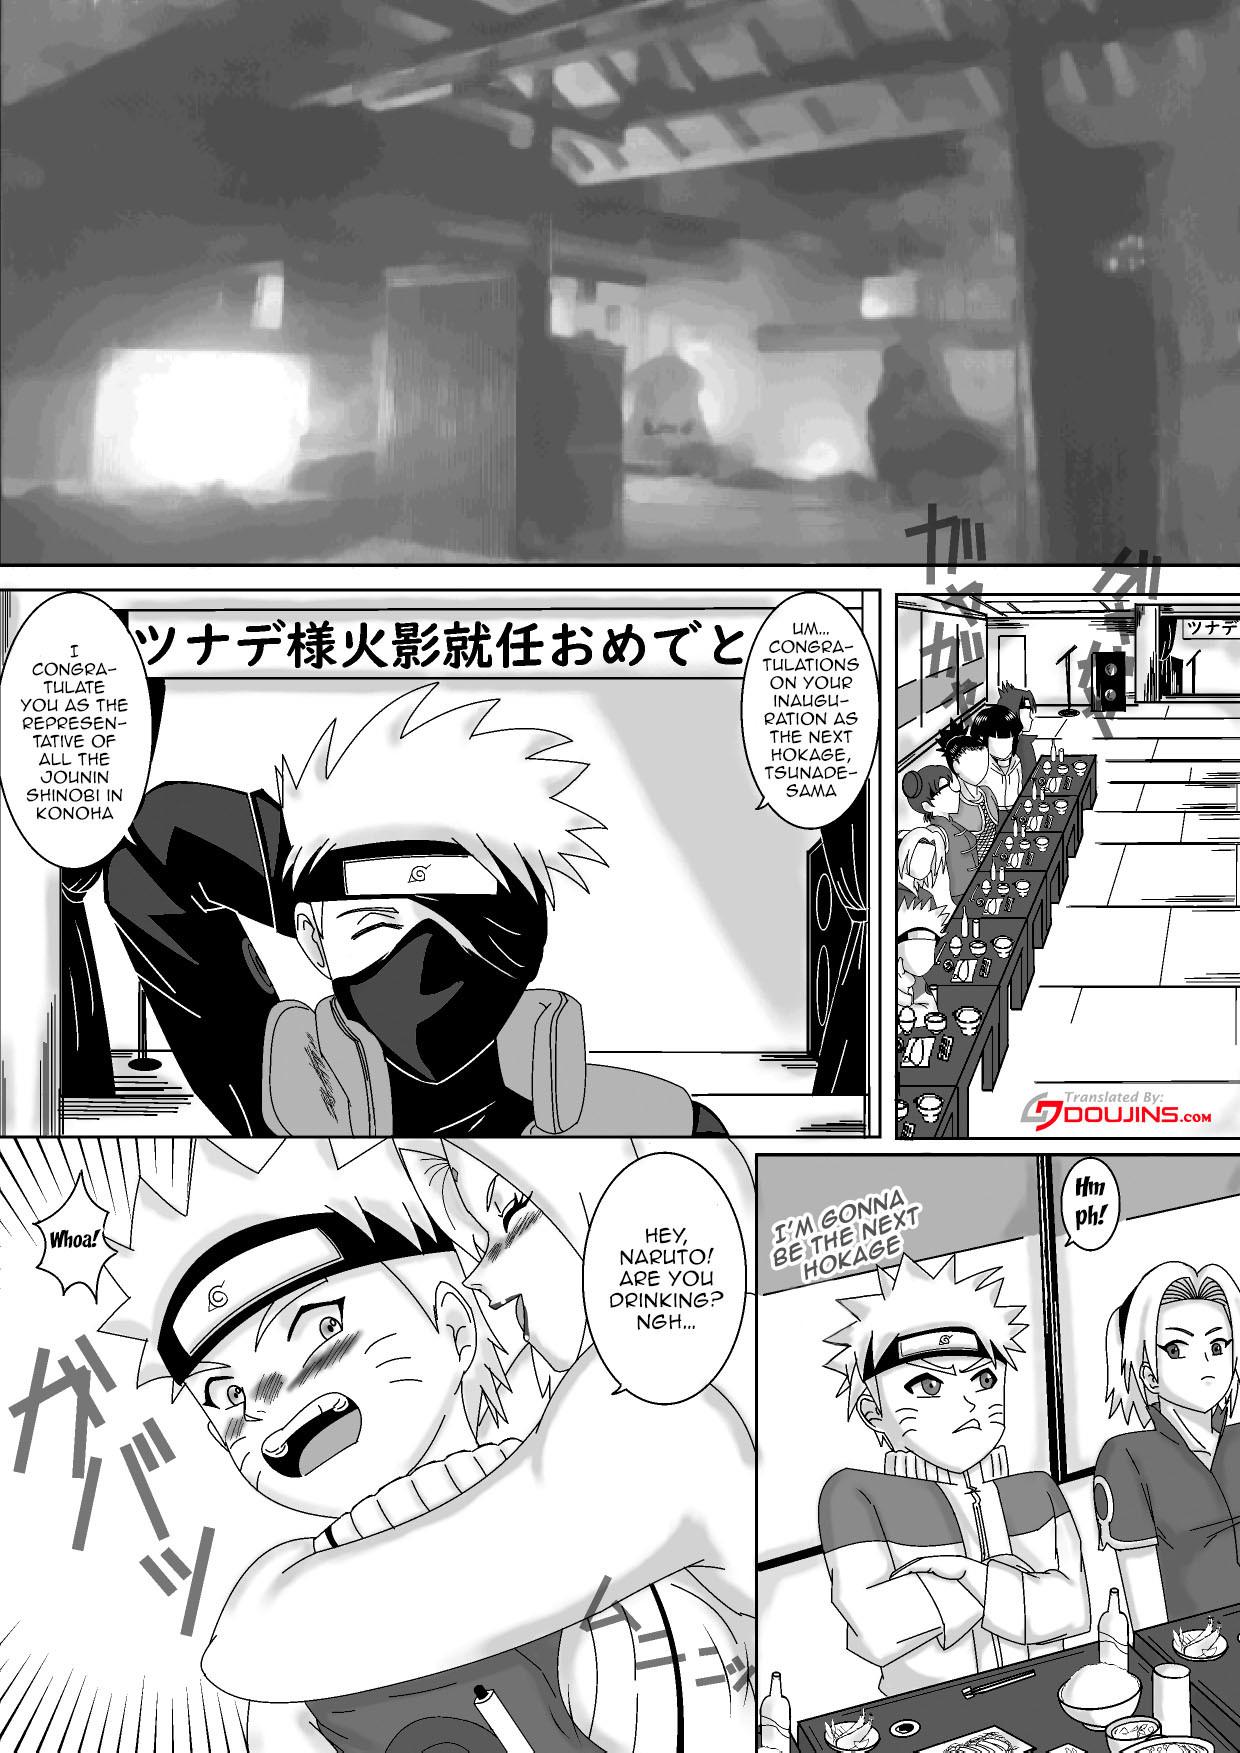 Eat Nomisugite Deisui Shita BBA to Yarimakutta Ken!! | The Case Of Having Sex With This Old Lady After She Got Herself Really Drunk - Naruto Rubdown - Page 2